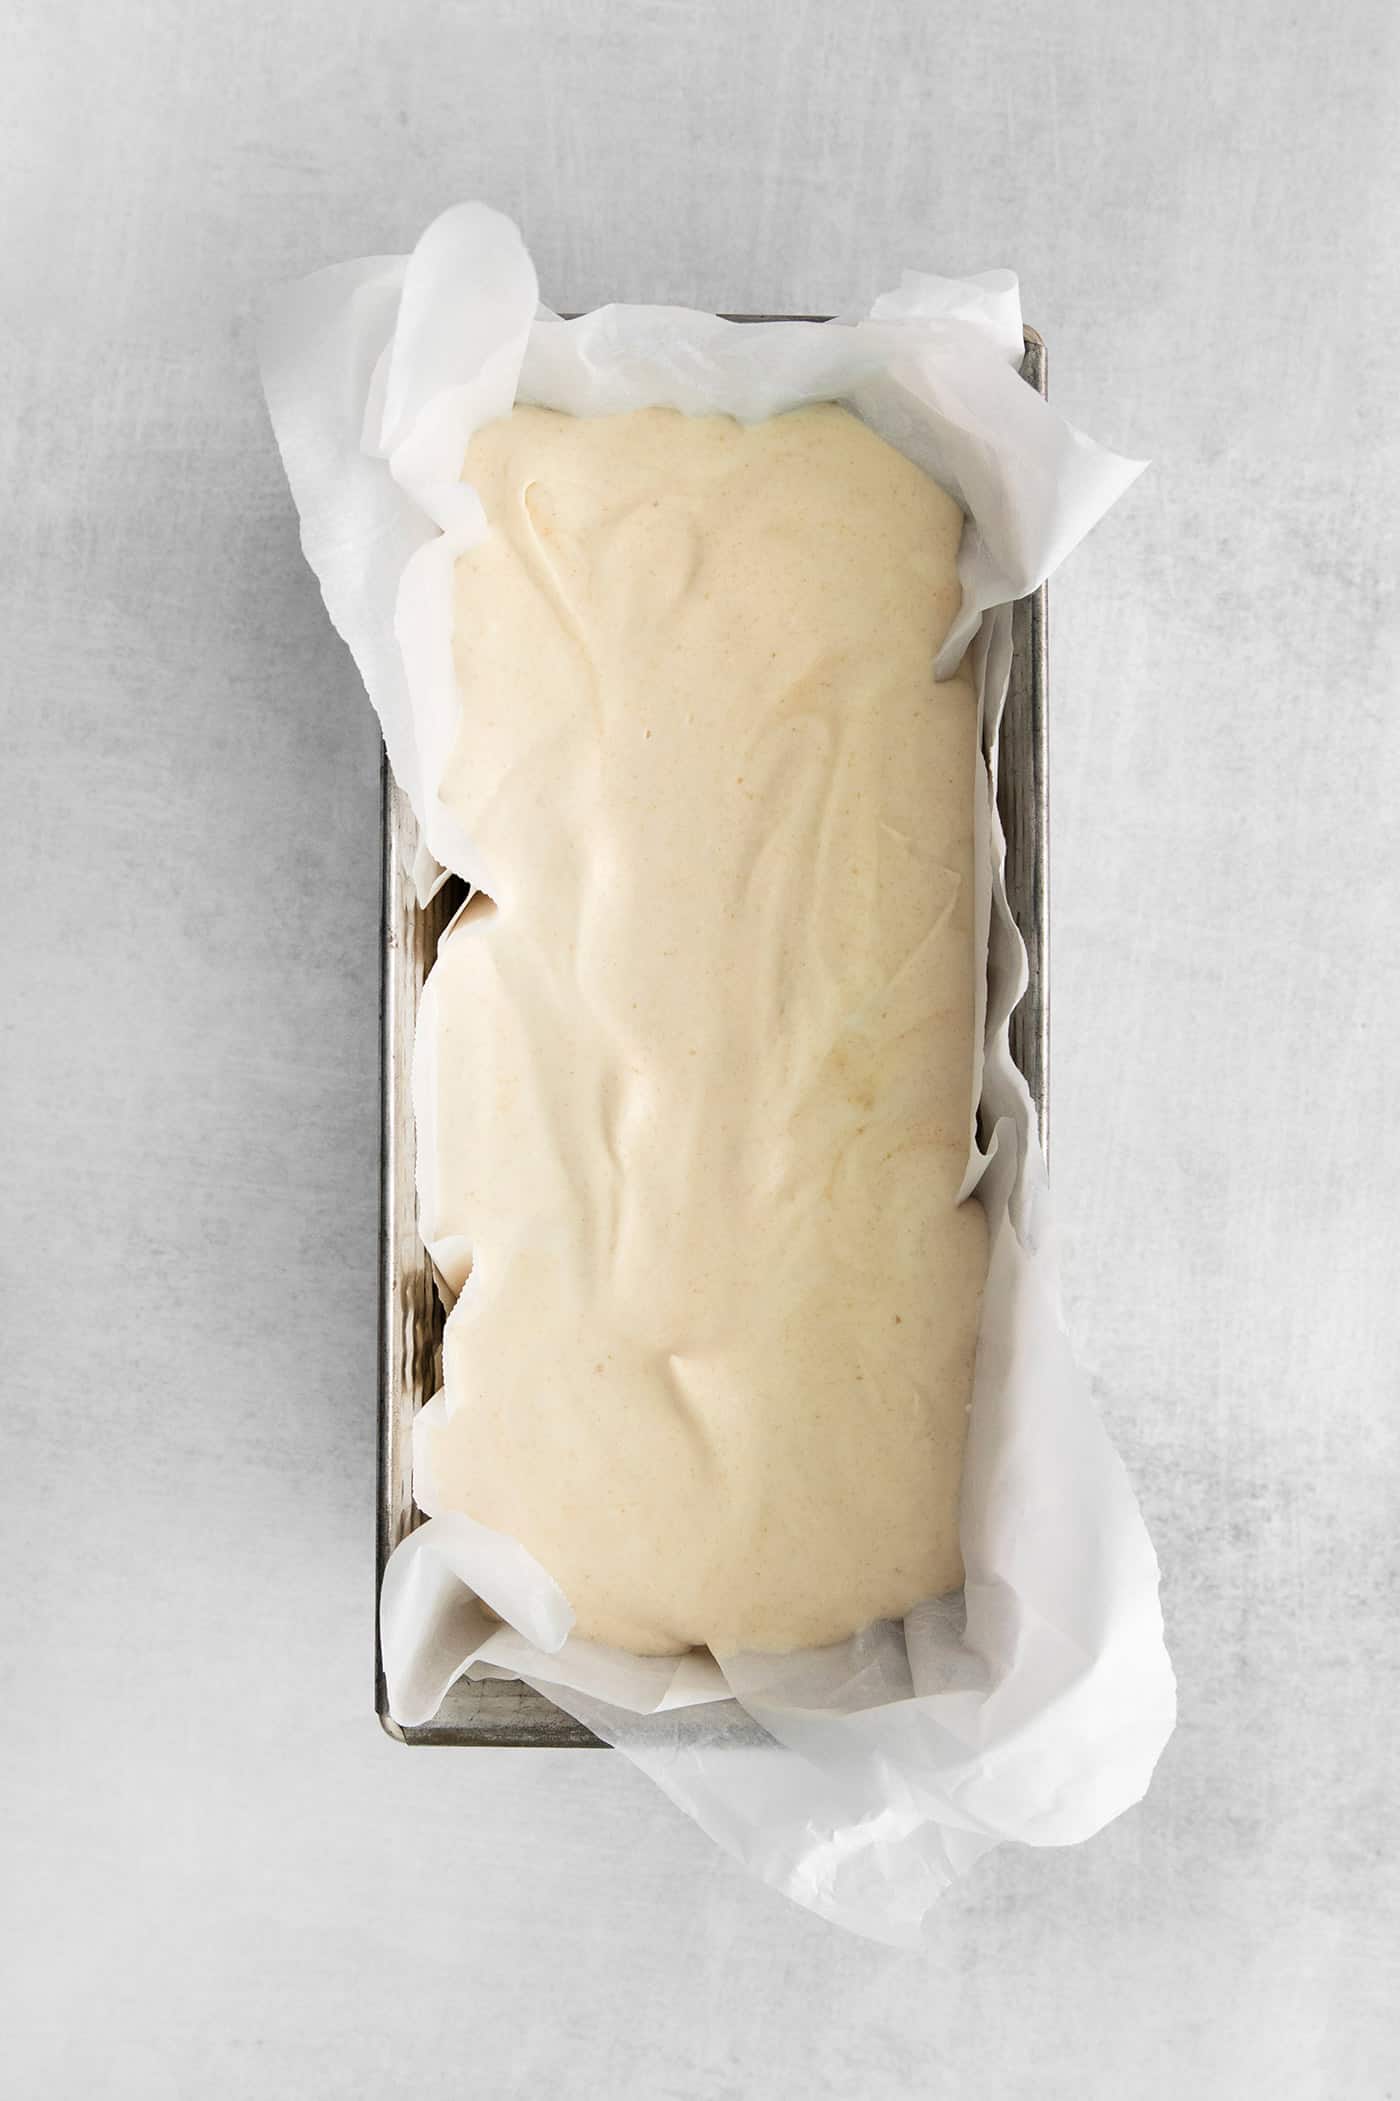 homemade ice cream in a loaf pan